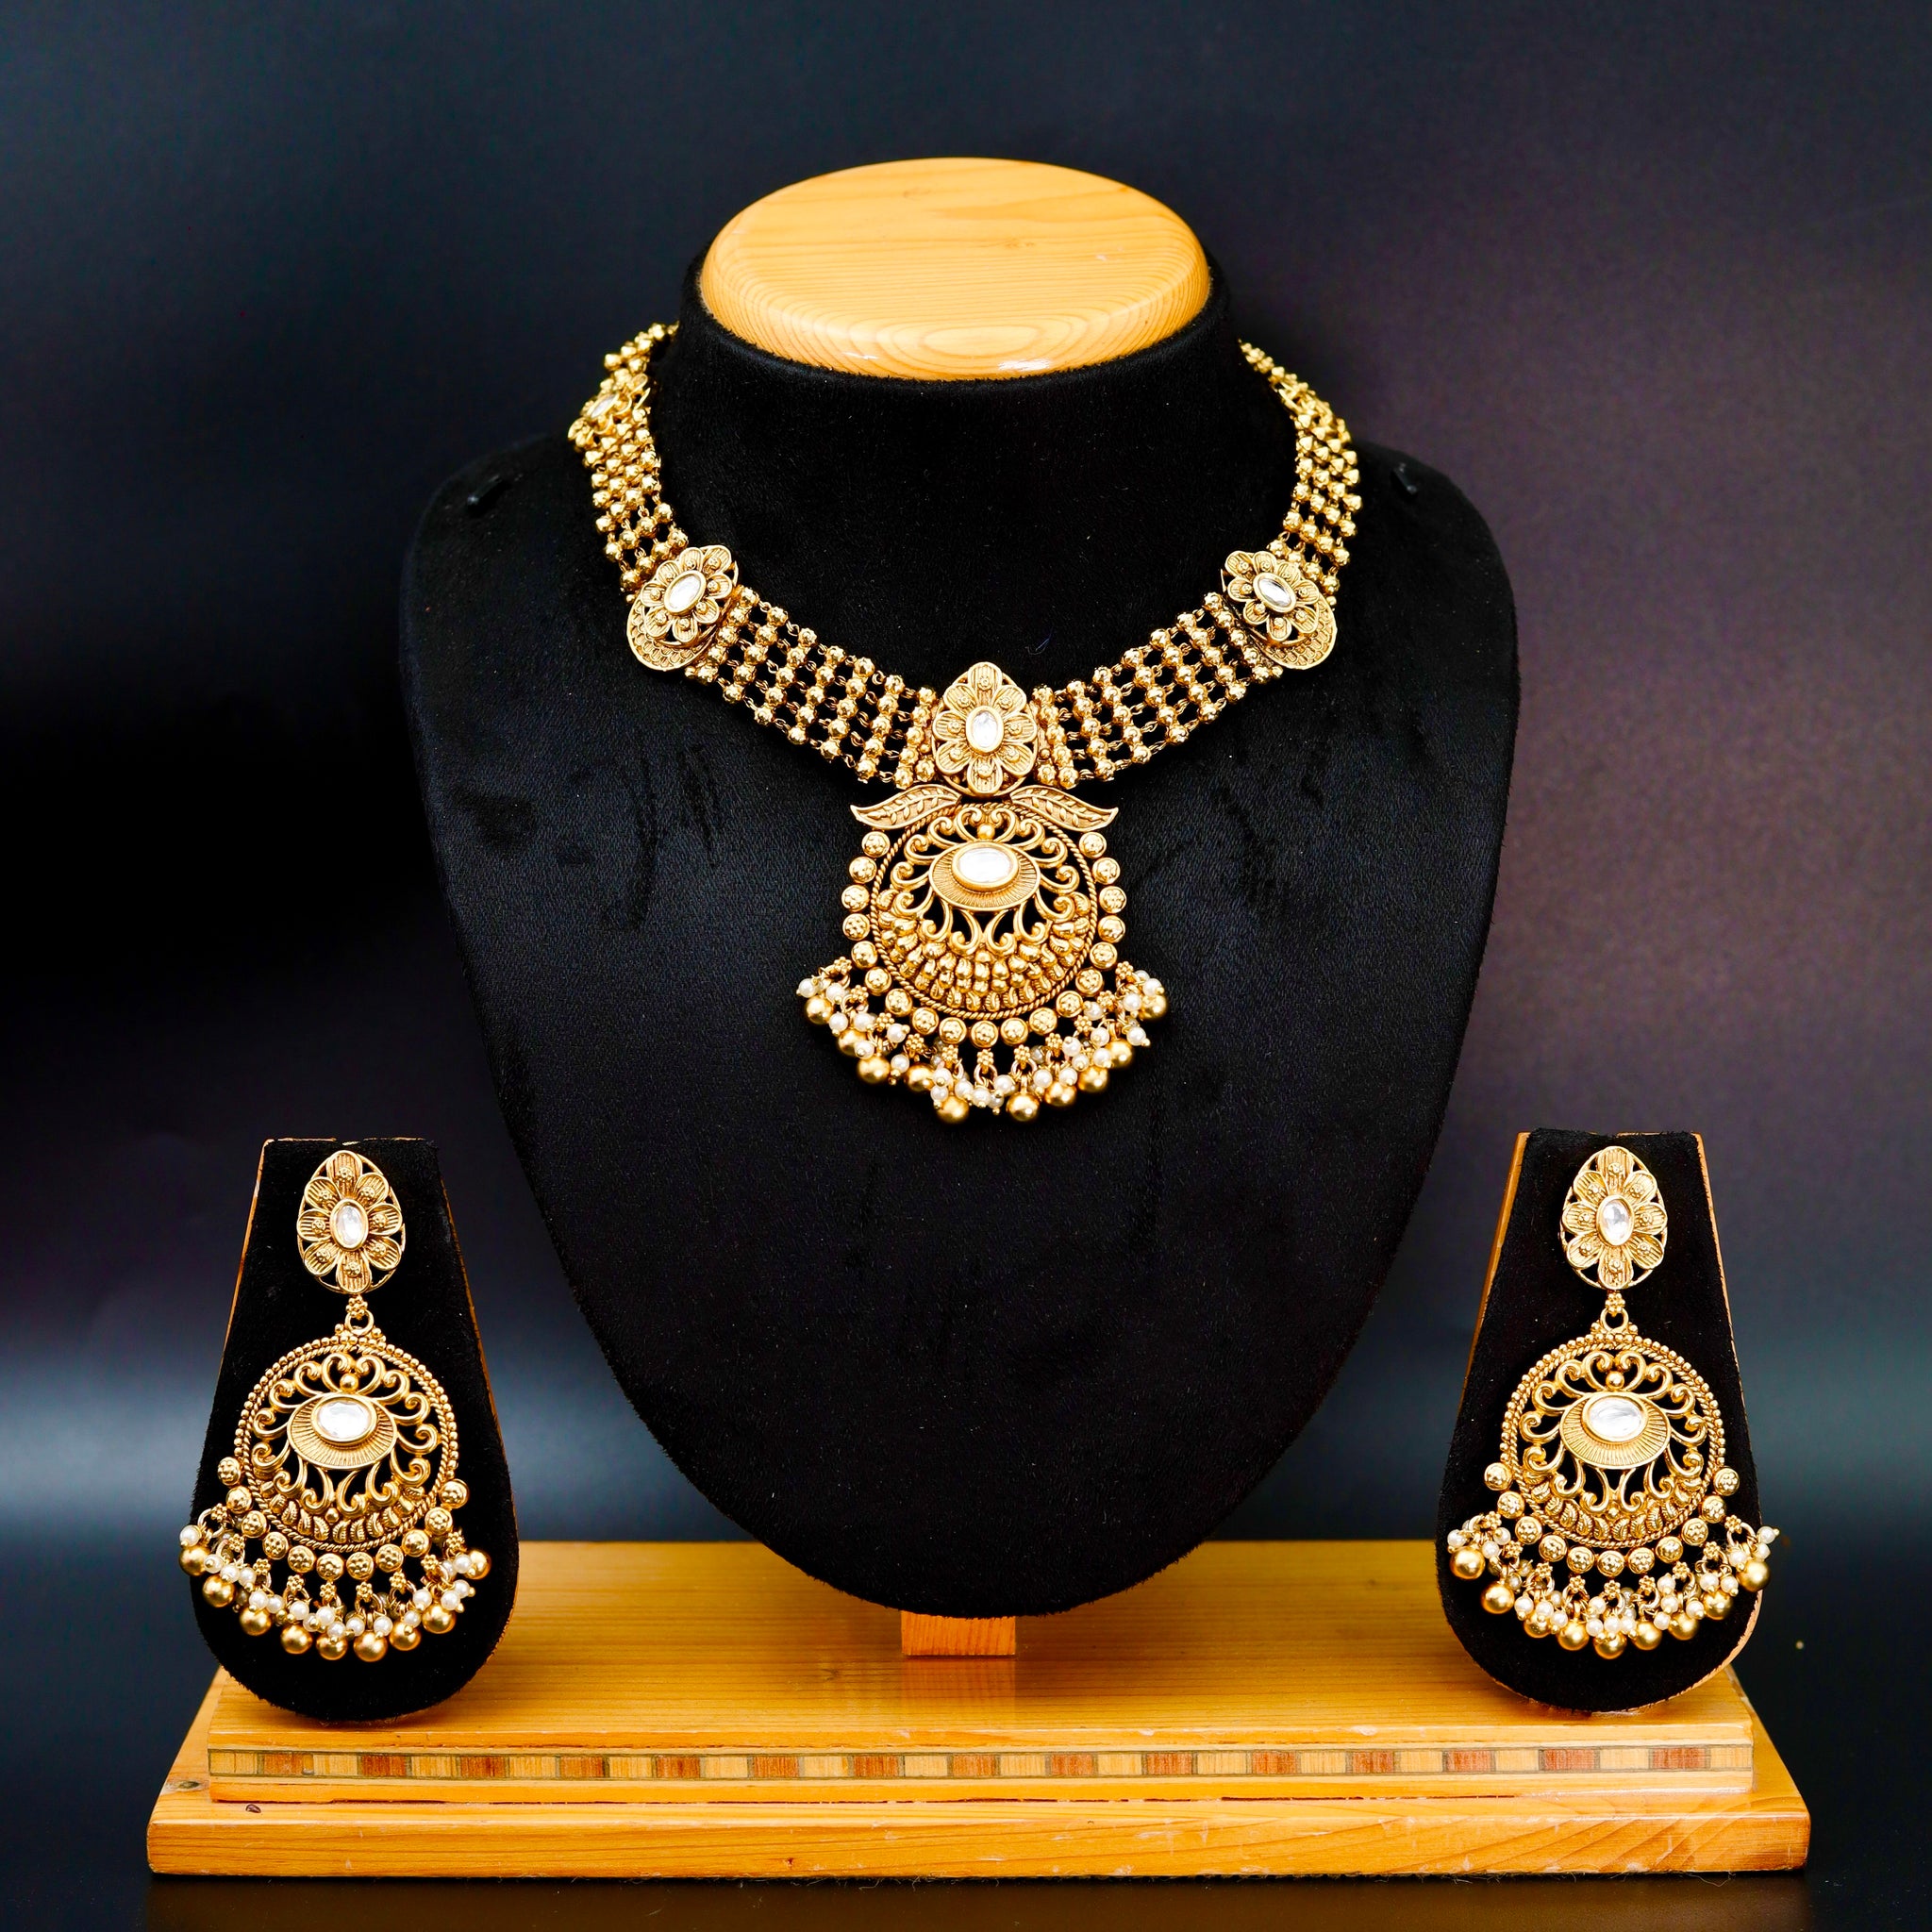 Antique Gold Plated Round Neck Necklace Set 10053-28